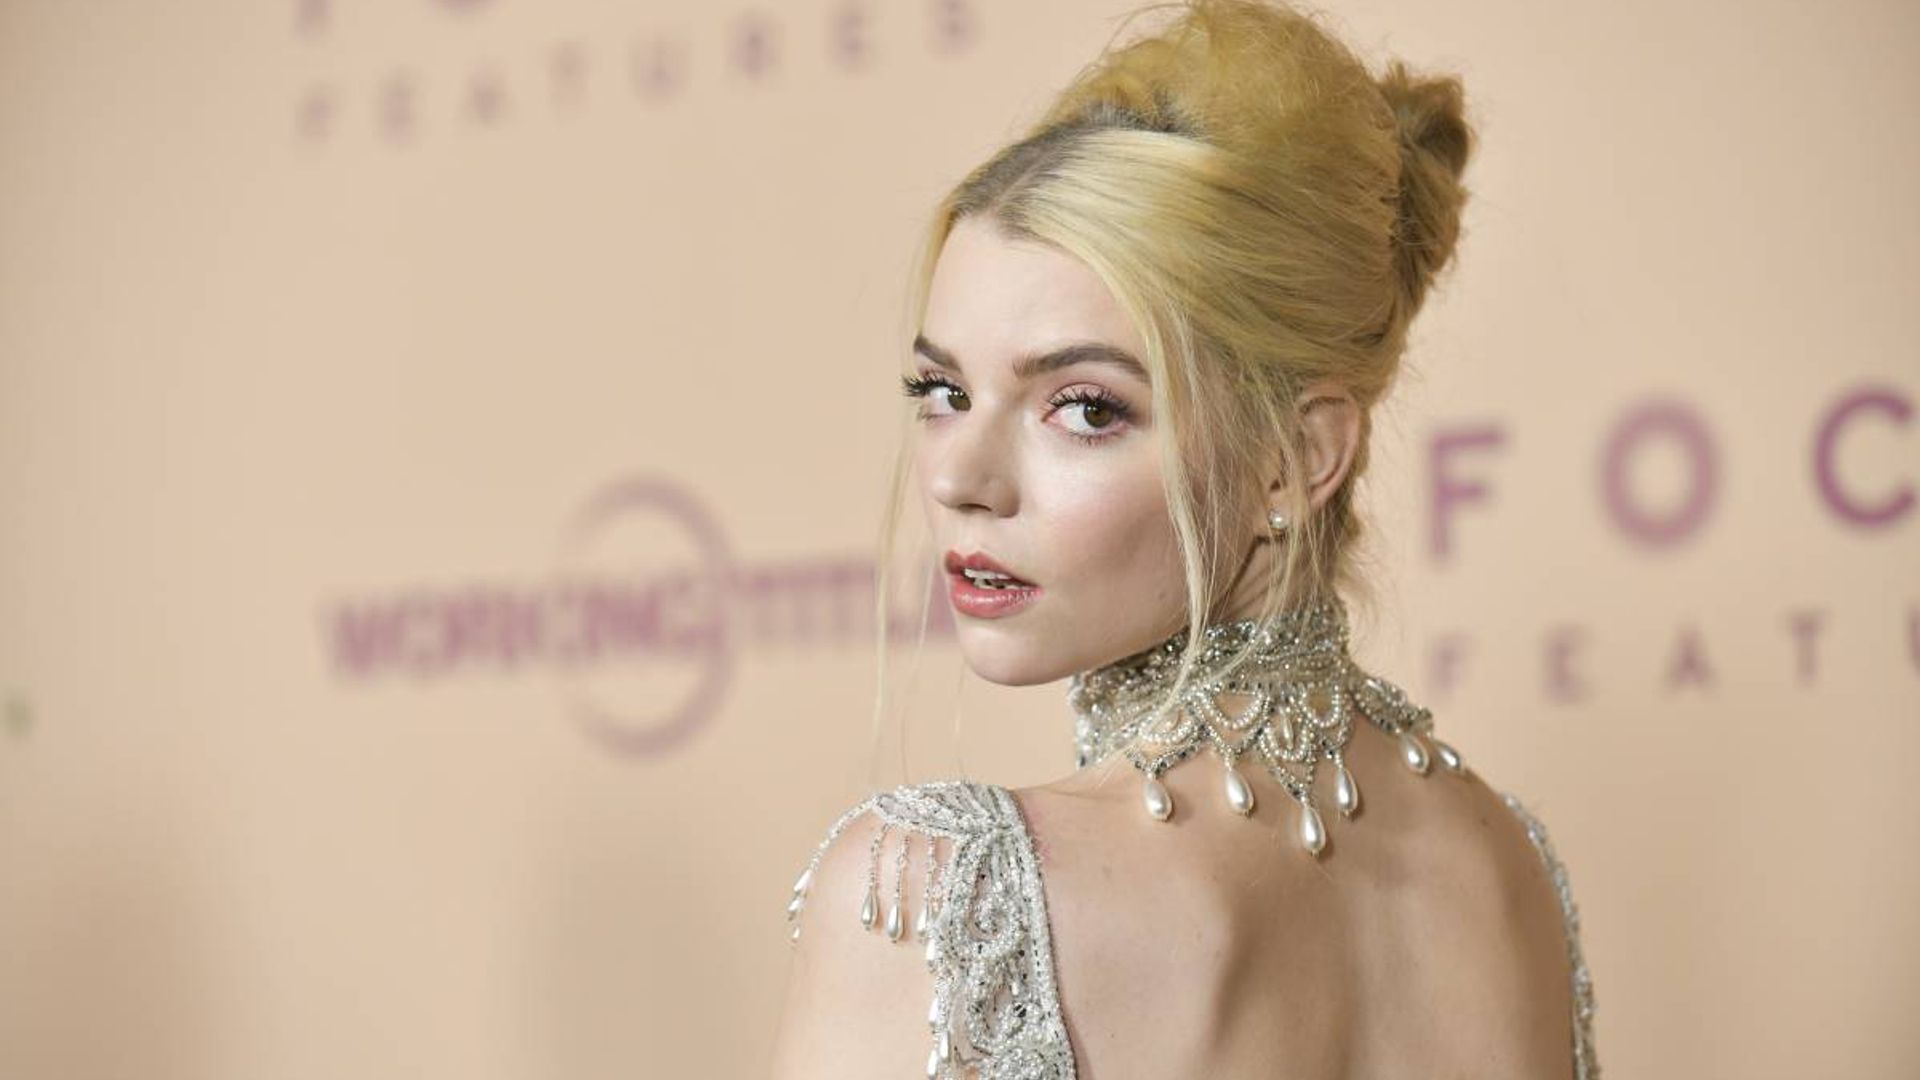 Anya Taylor-Joy's outfits in the Queen's Gambit are brilliant